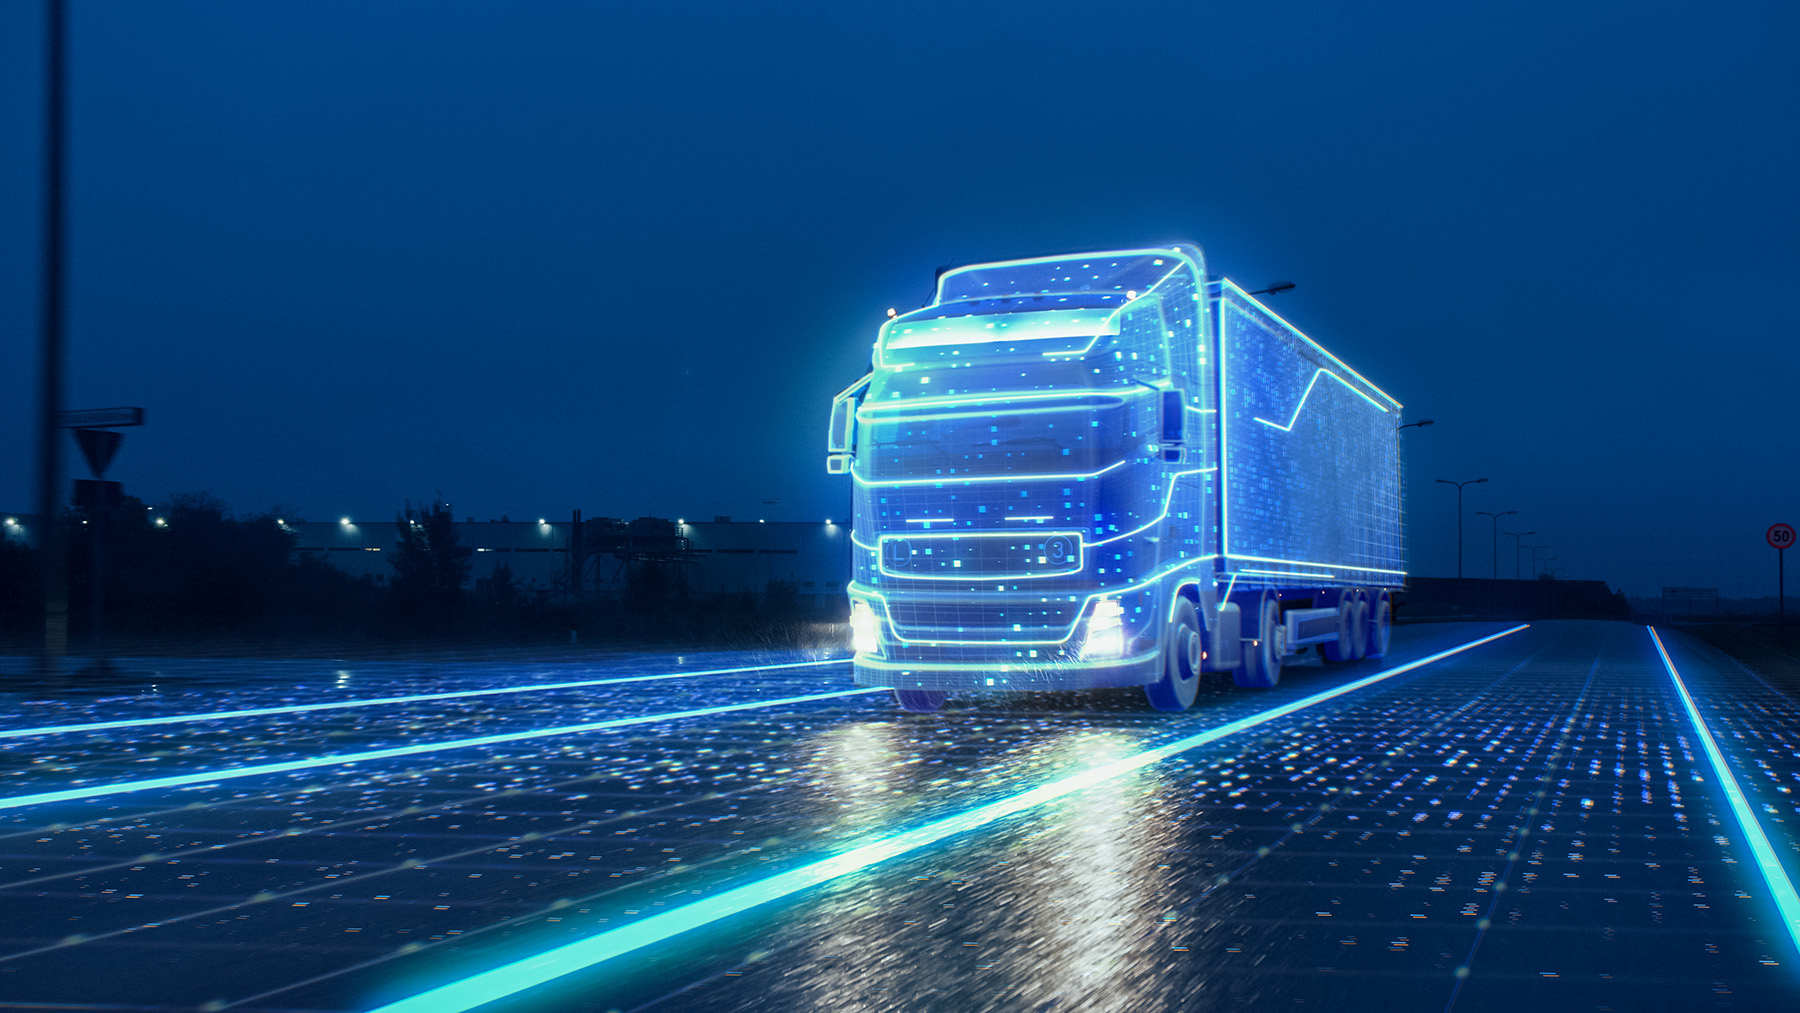 A futuristic, autonomous semitruck with cargo trailer drives at night along a highway with road sensors that scan its surroundings.